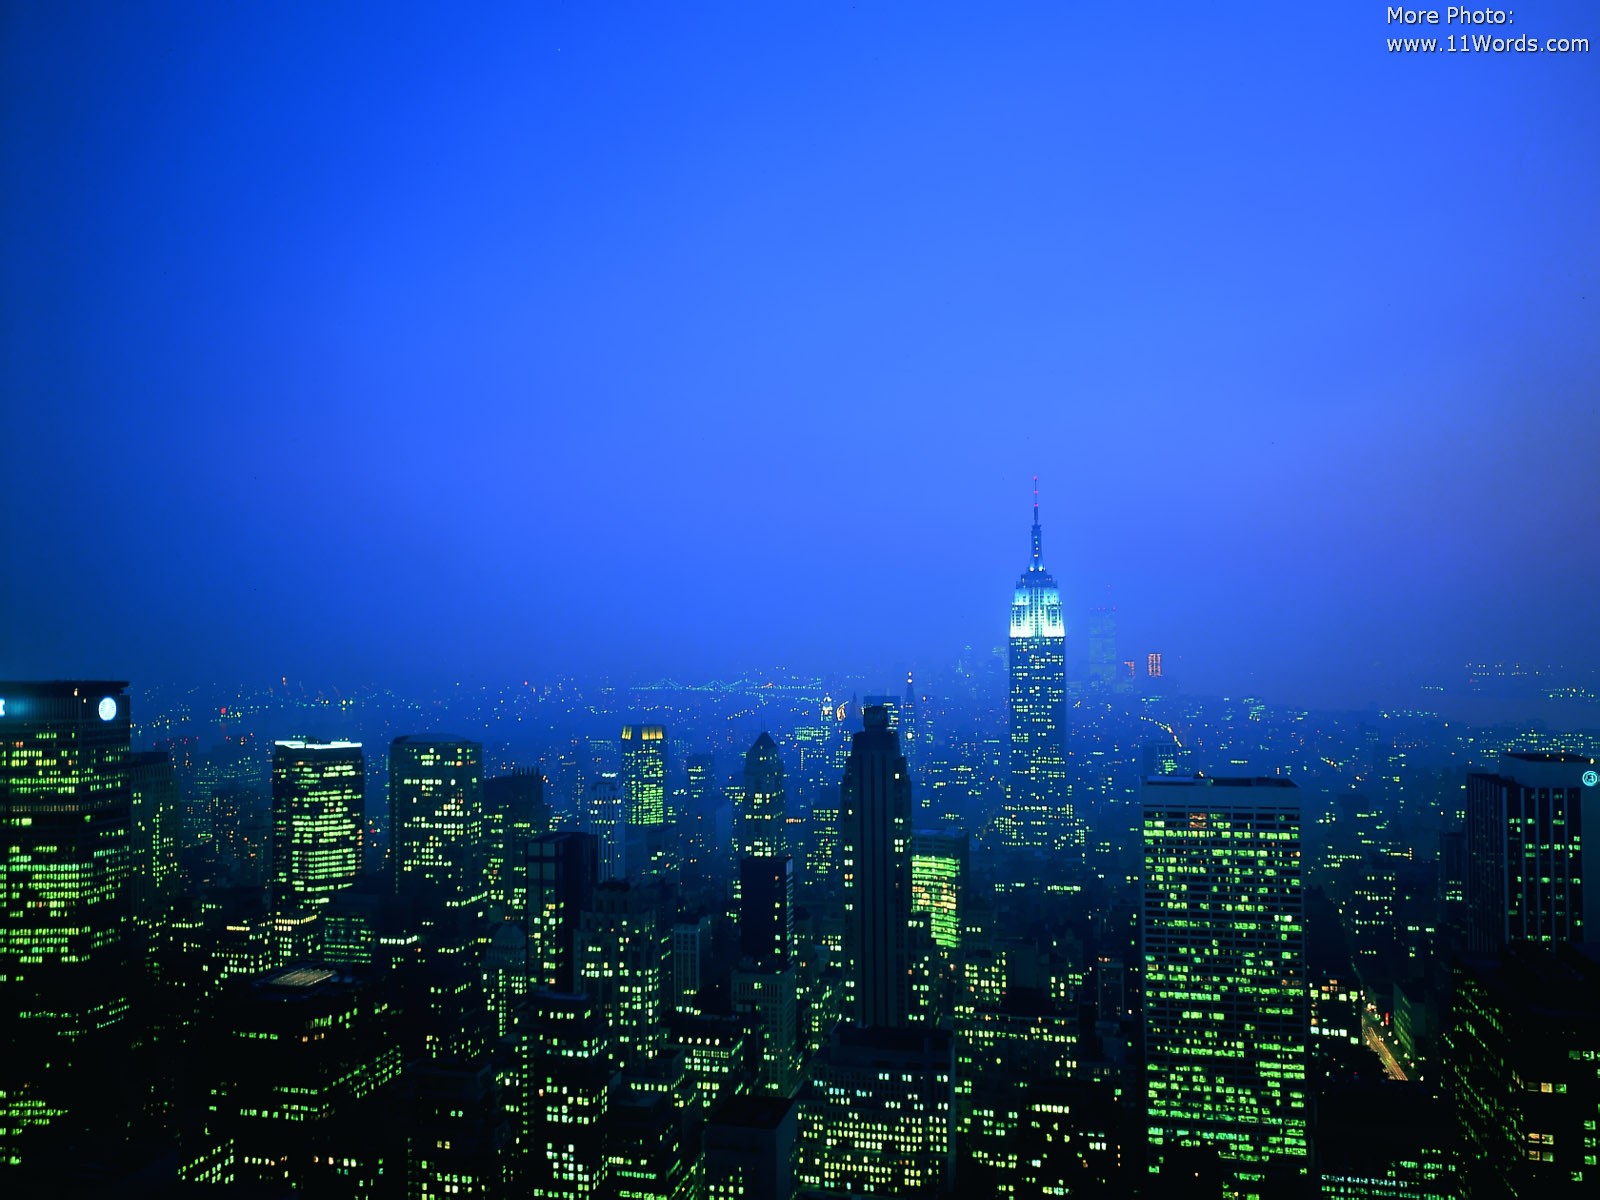 Free Wallpapers: Cities Scenes In Night Time